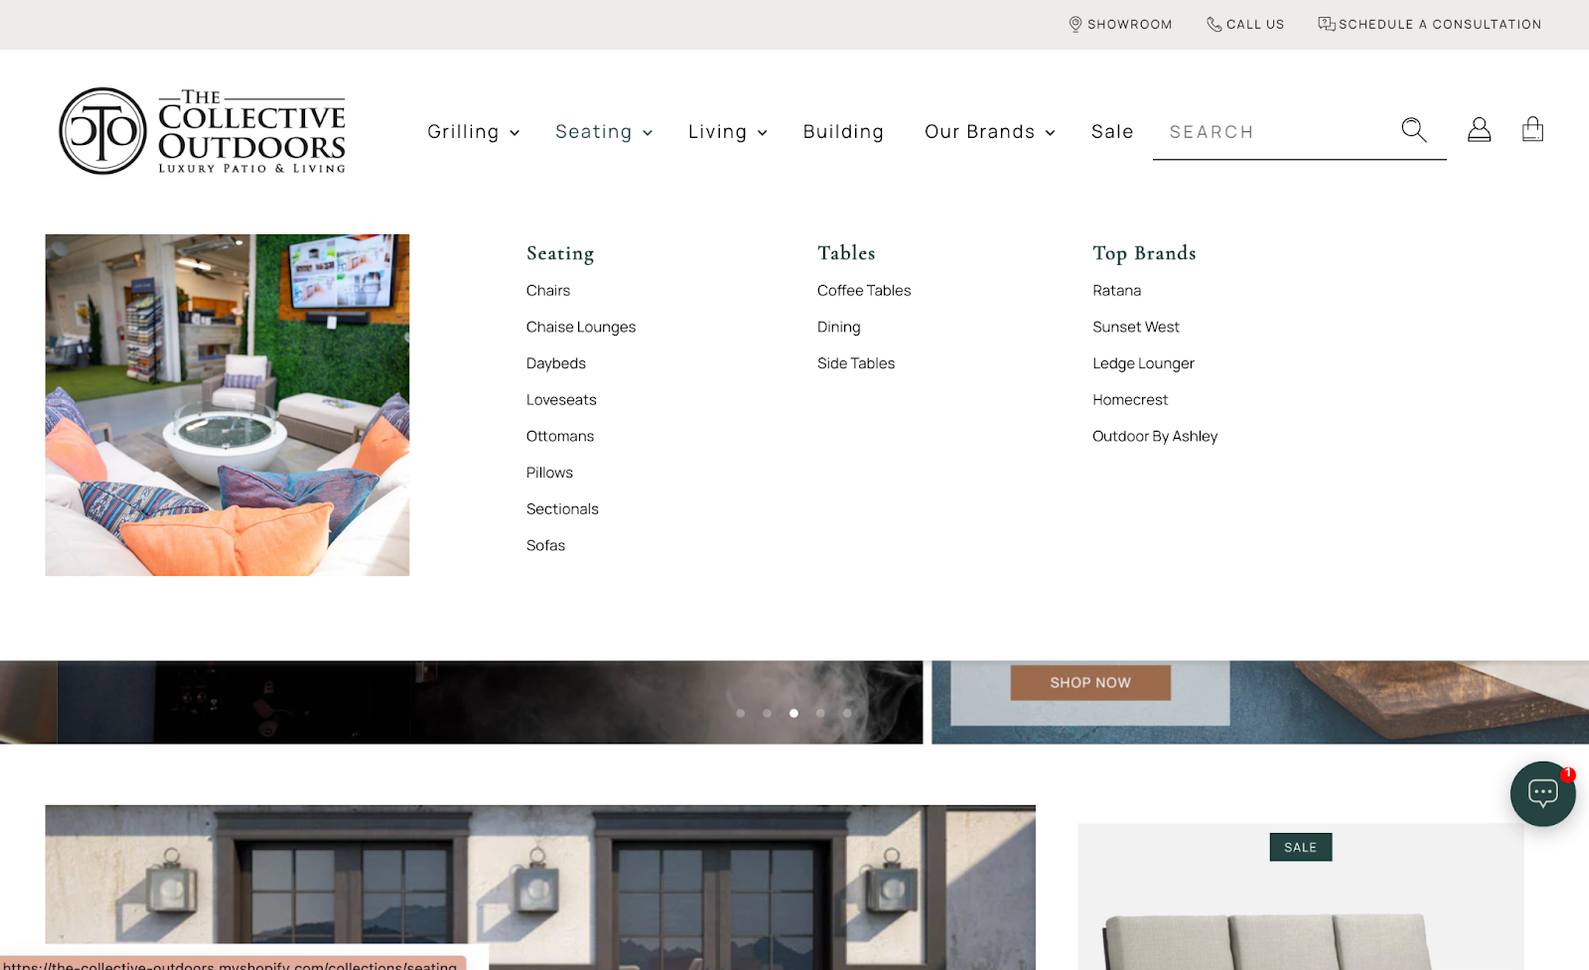 The Collective Outdoors home page with dropdown menus along with lifestyle product images.